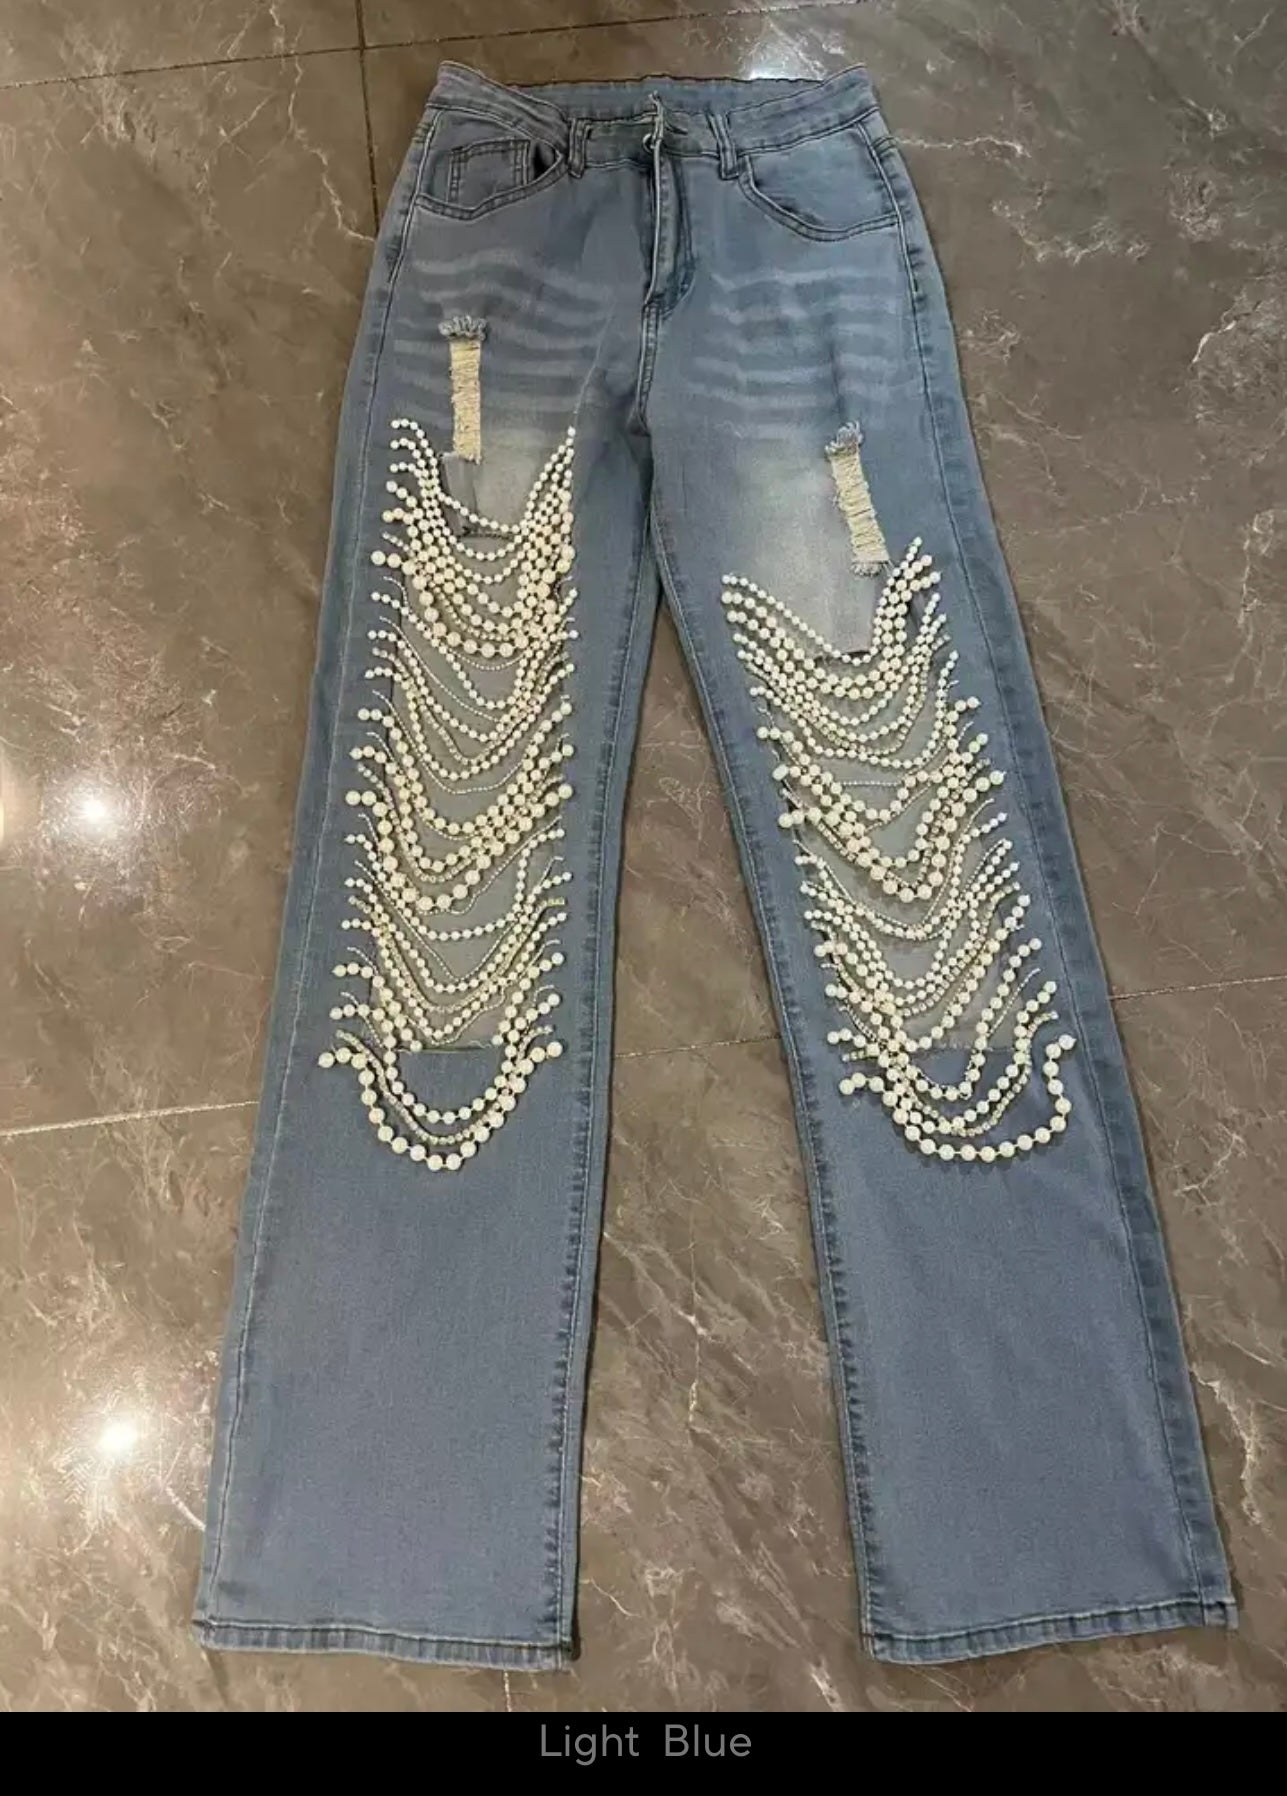 The Top Quality Denim Pants (Comes In Three Colors)